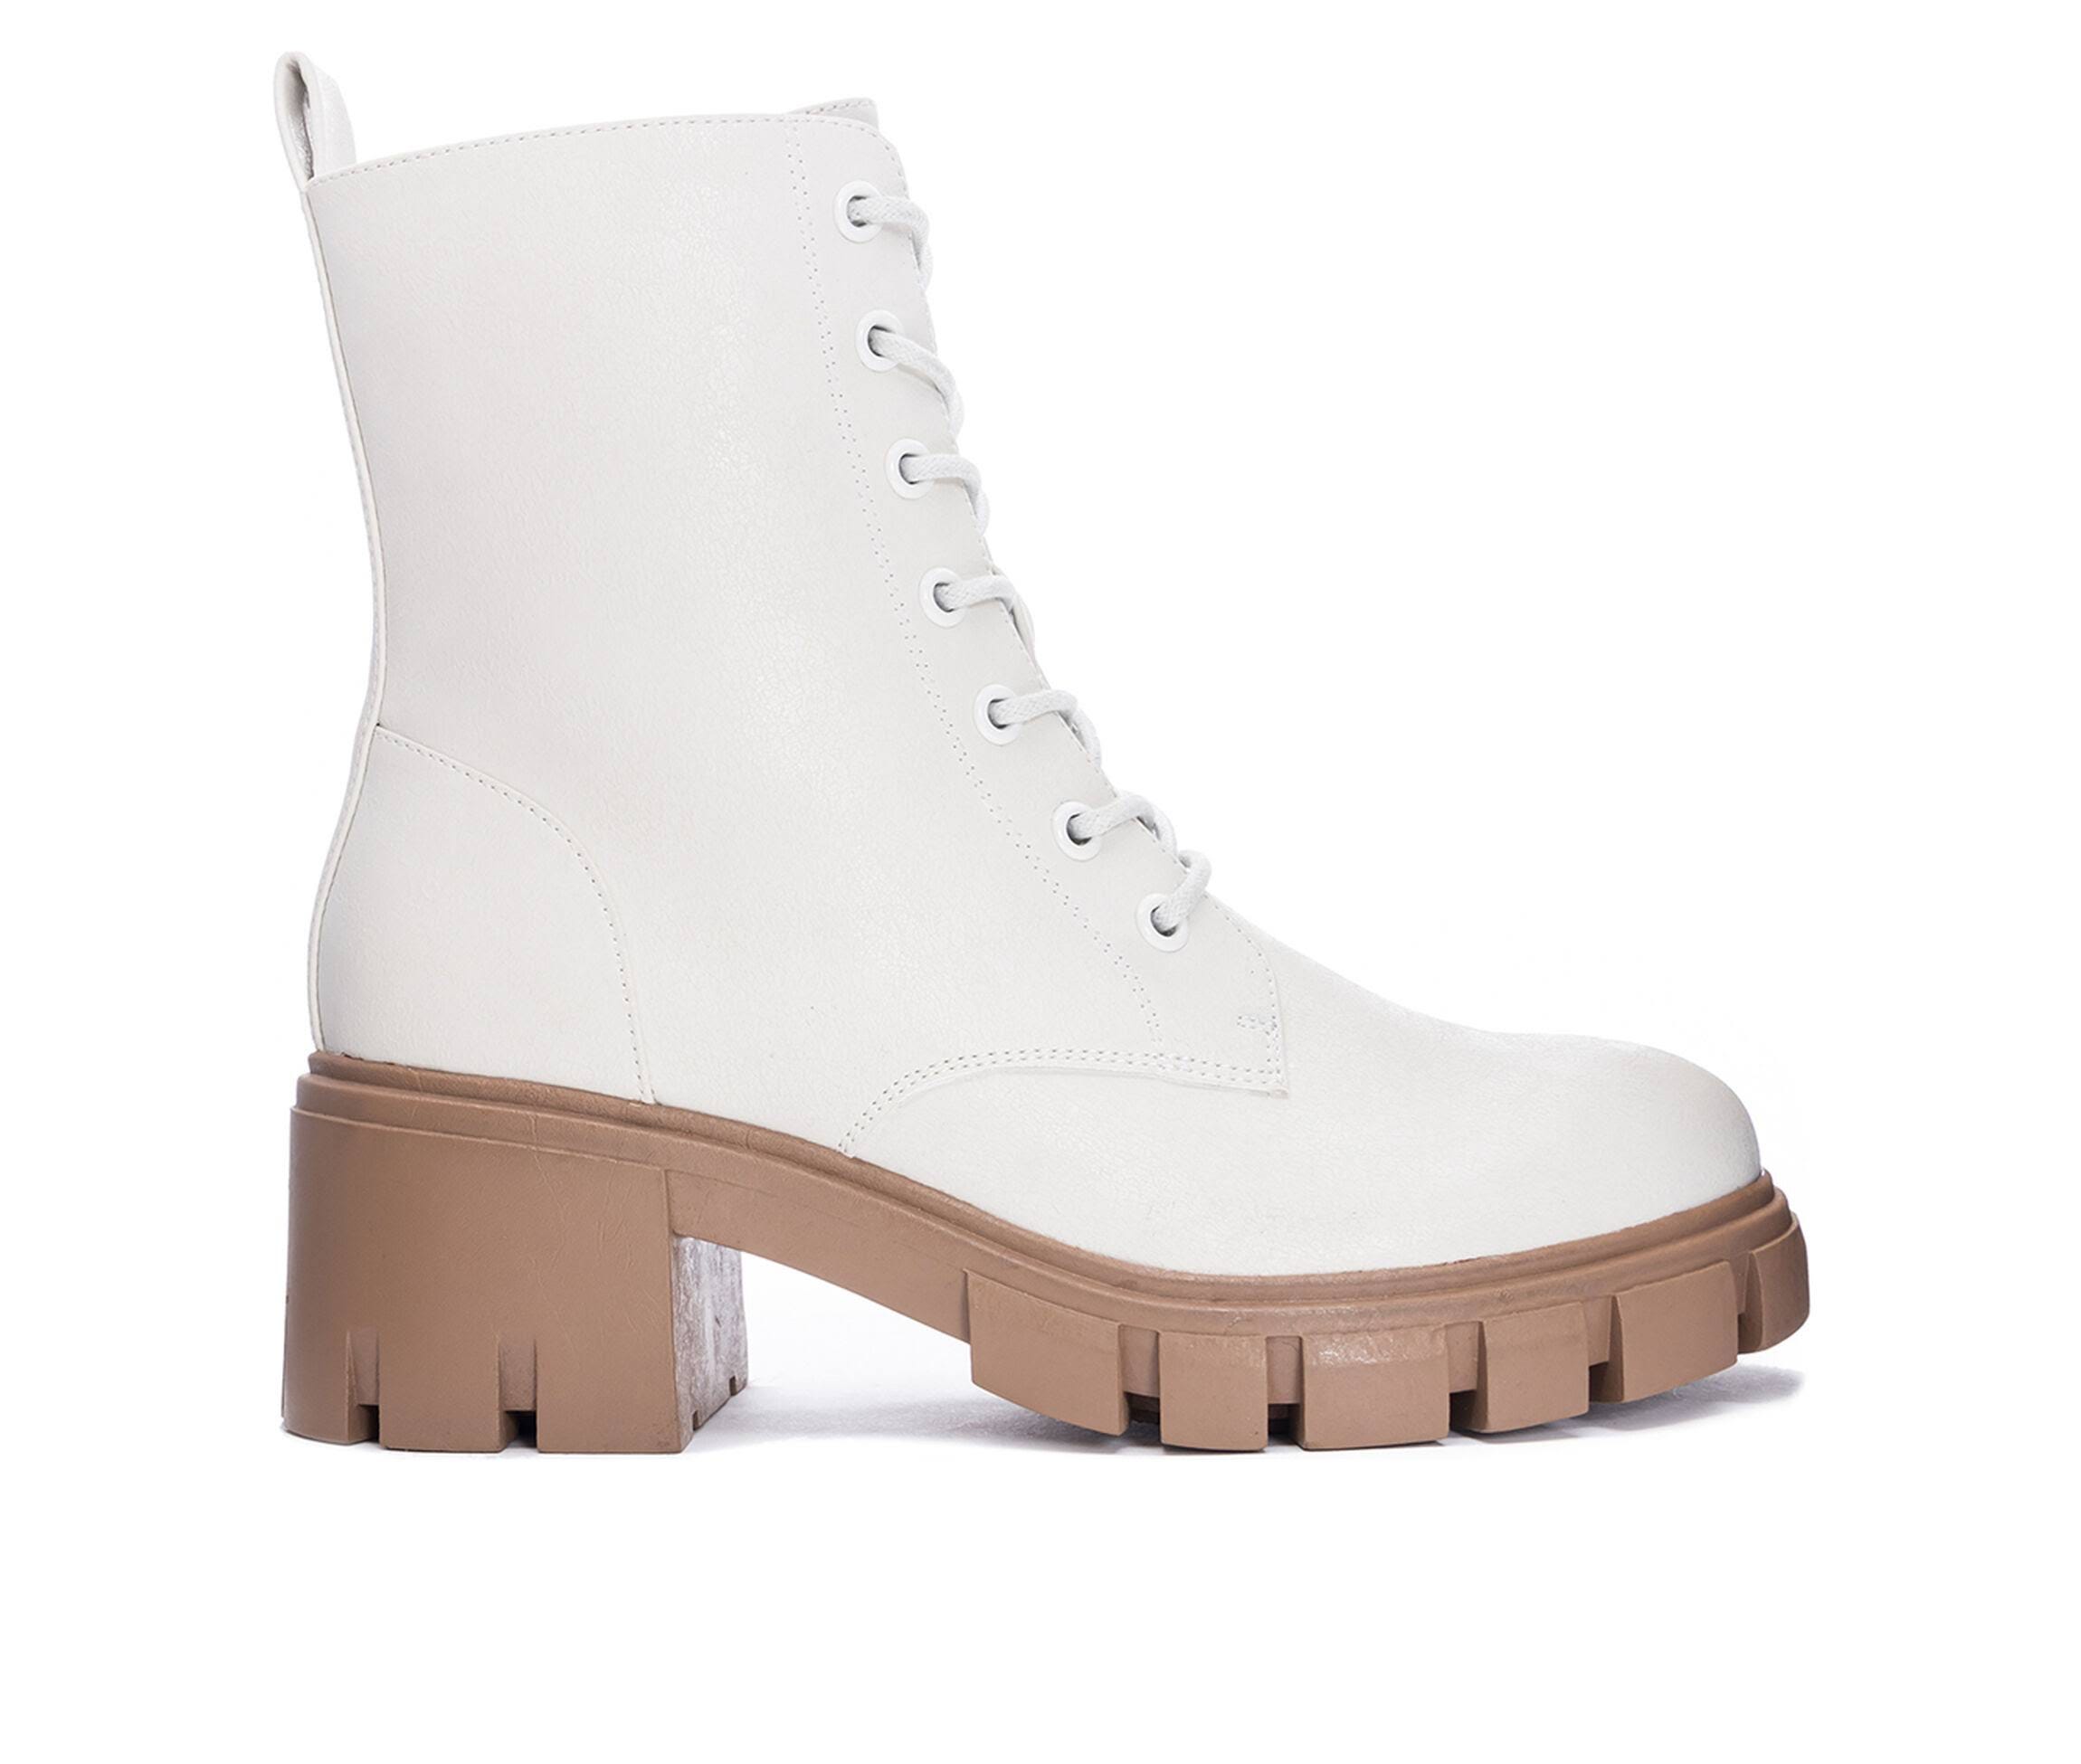 Chic Vegan Leather Combat Boots in White Size 11 | Image